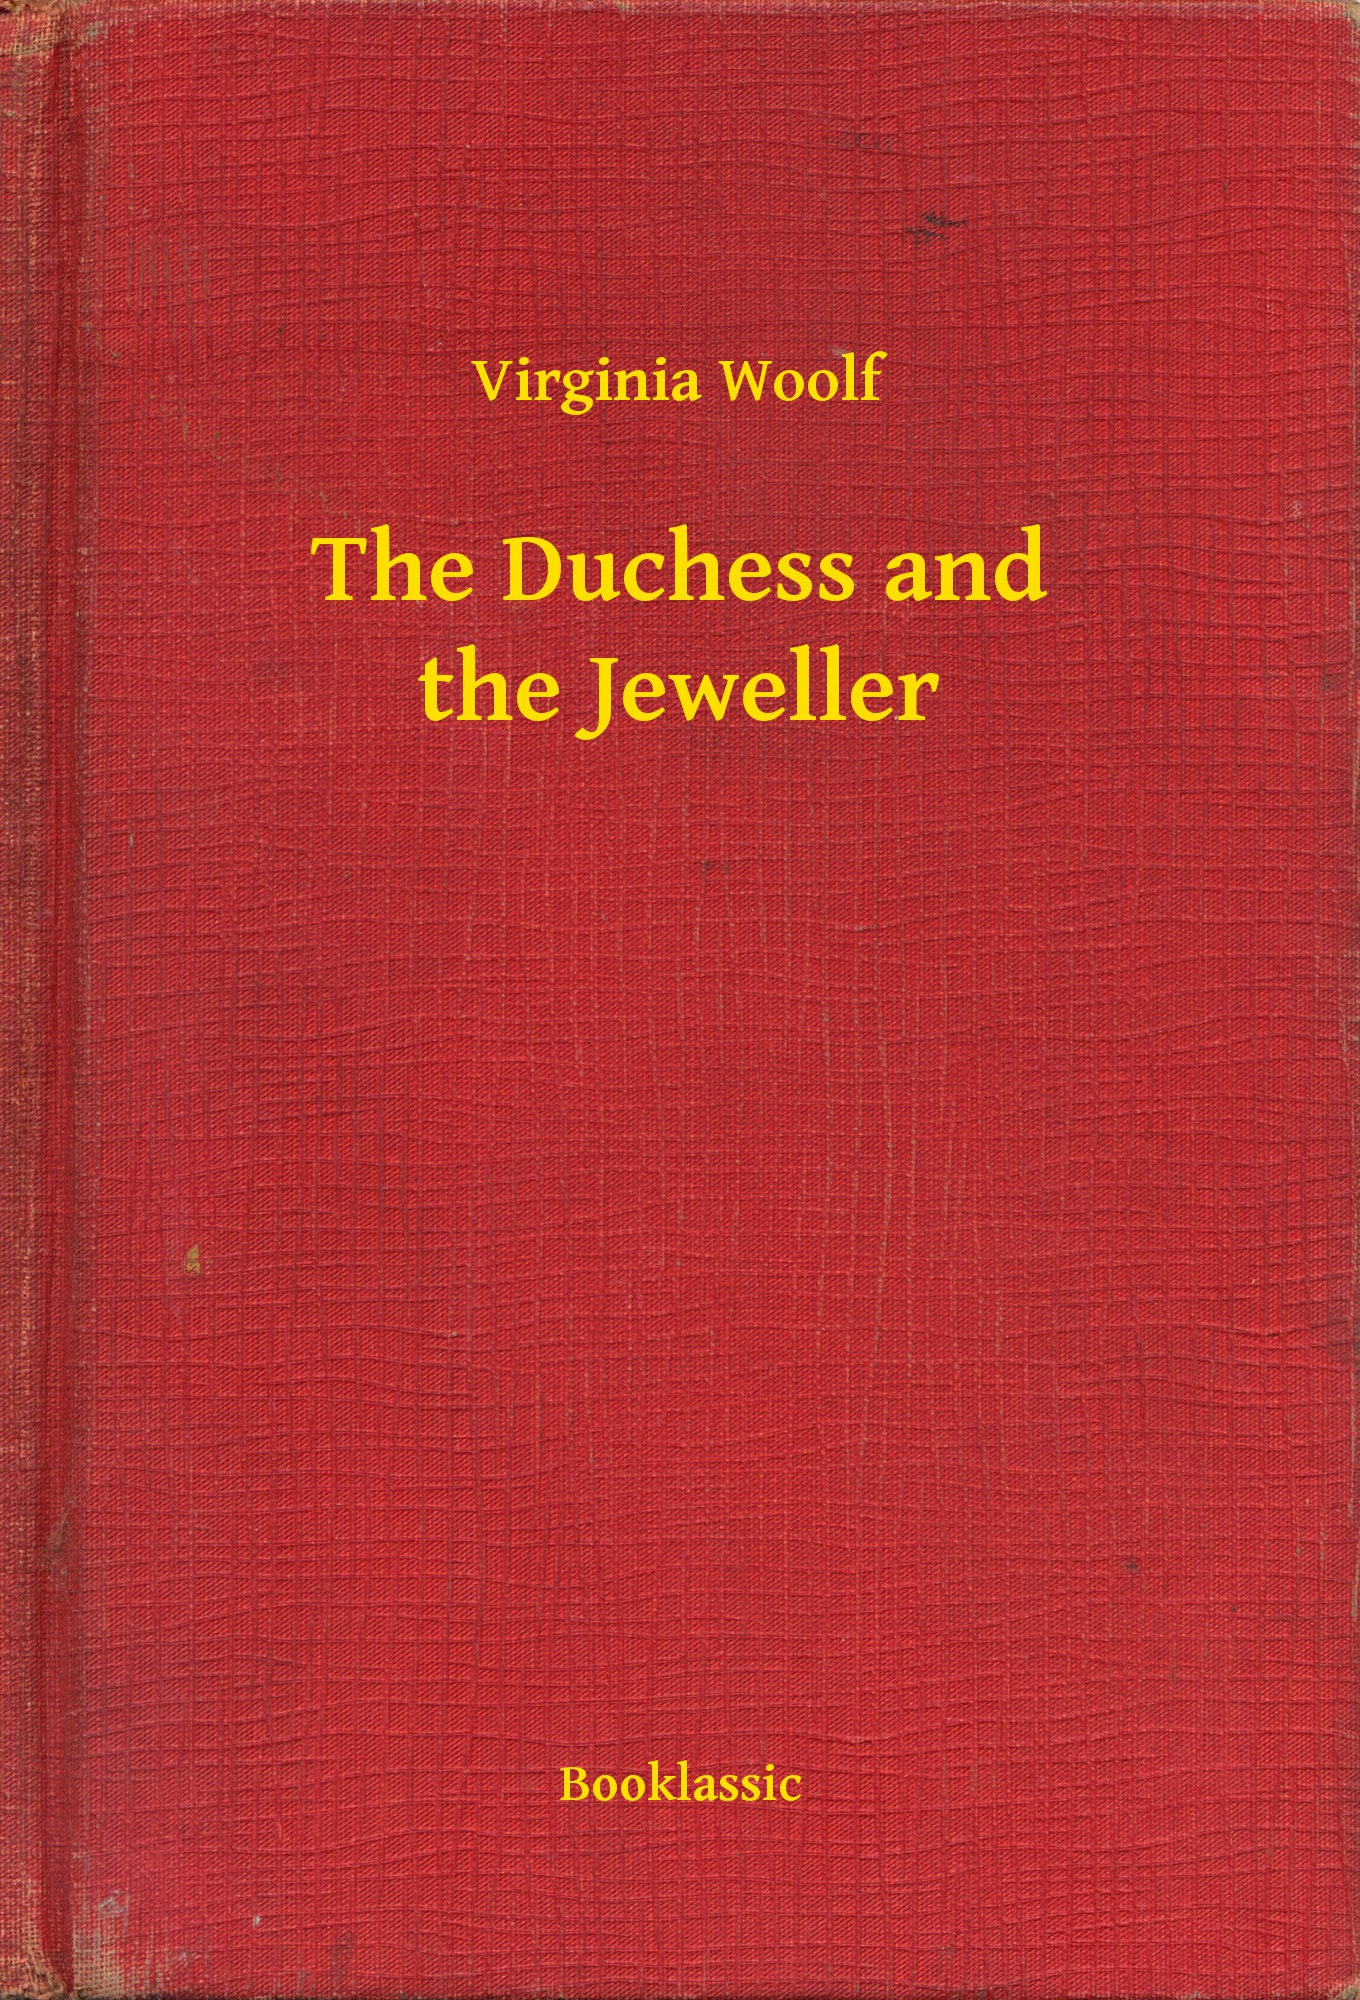 The Duchess and the Jeweller